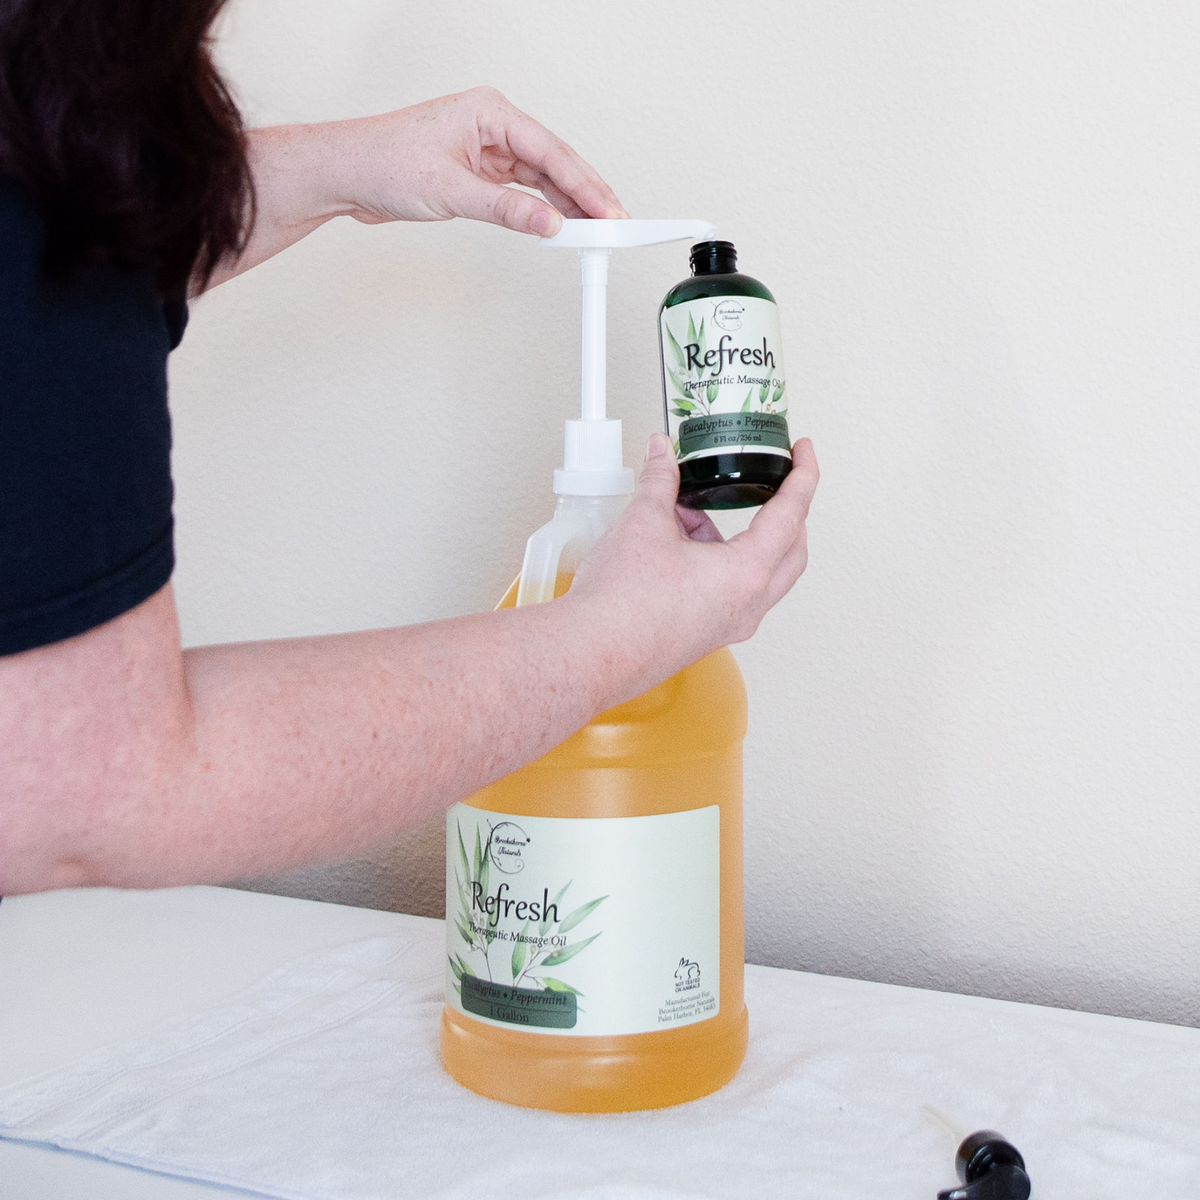 Refresh Massage Oil being pumped from a gallon jug into an 8oz bottle